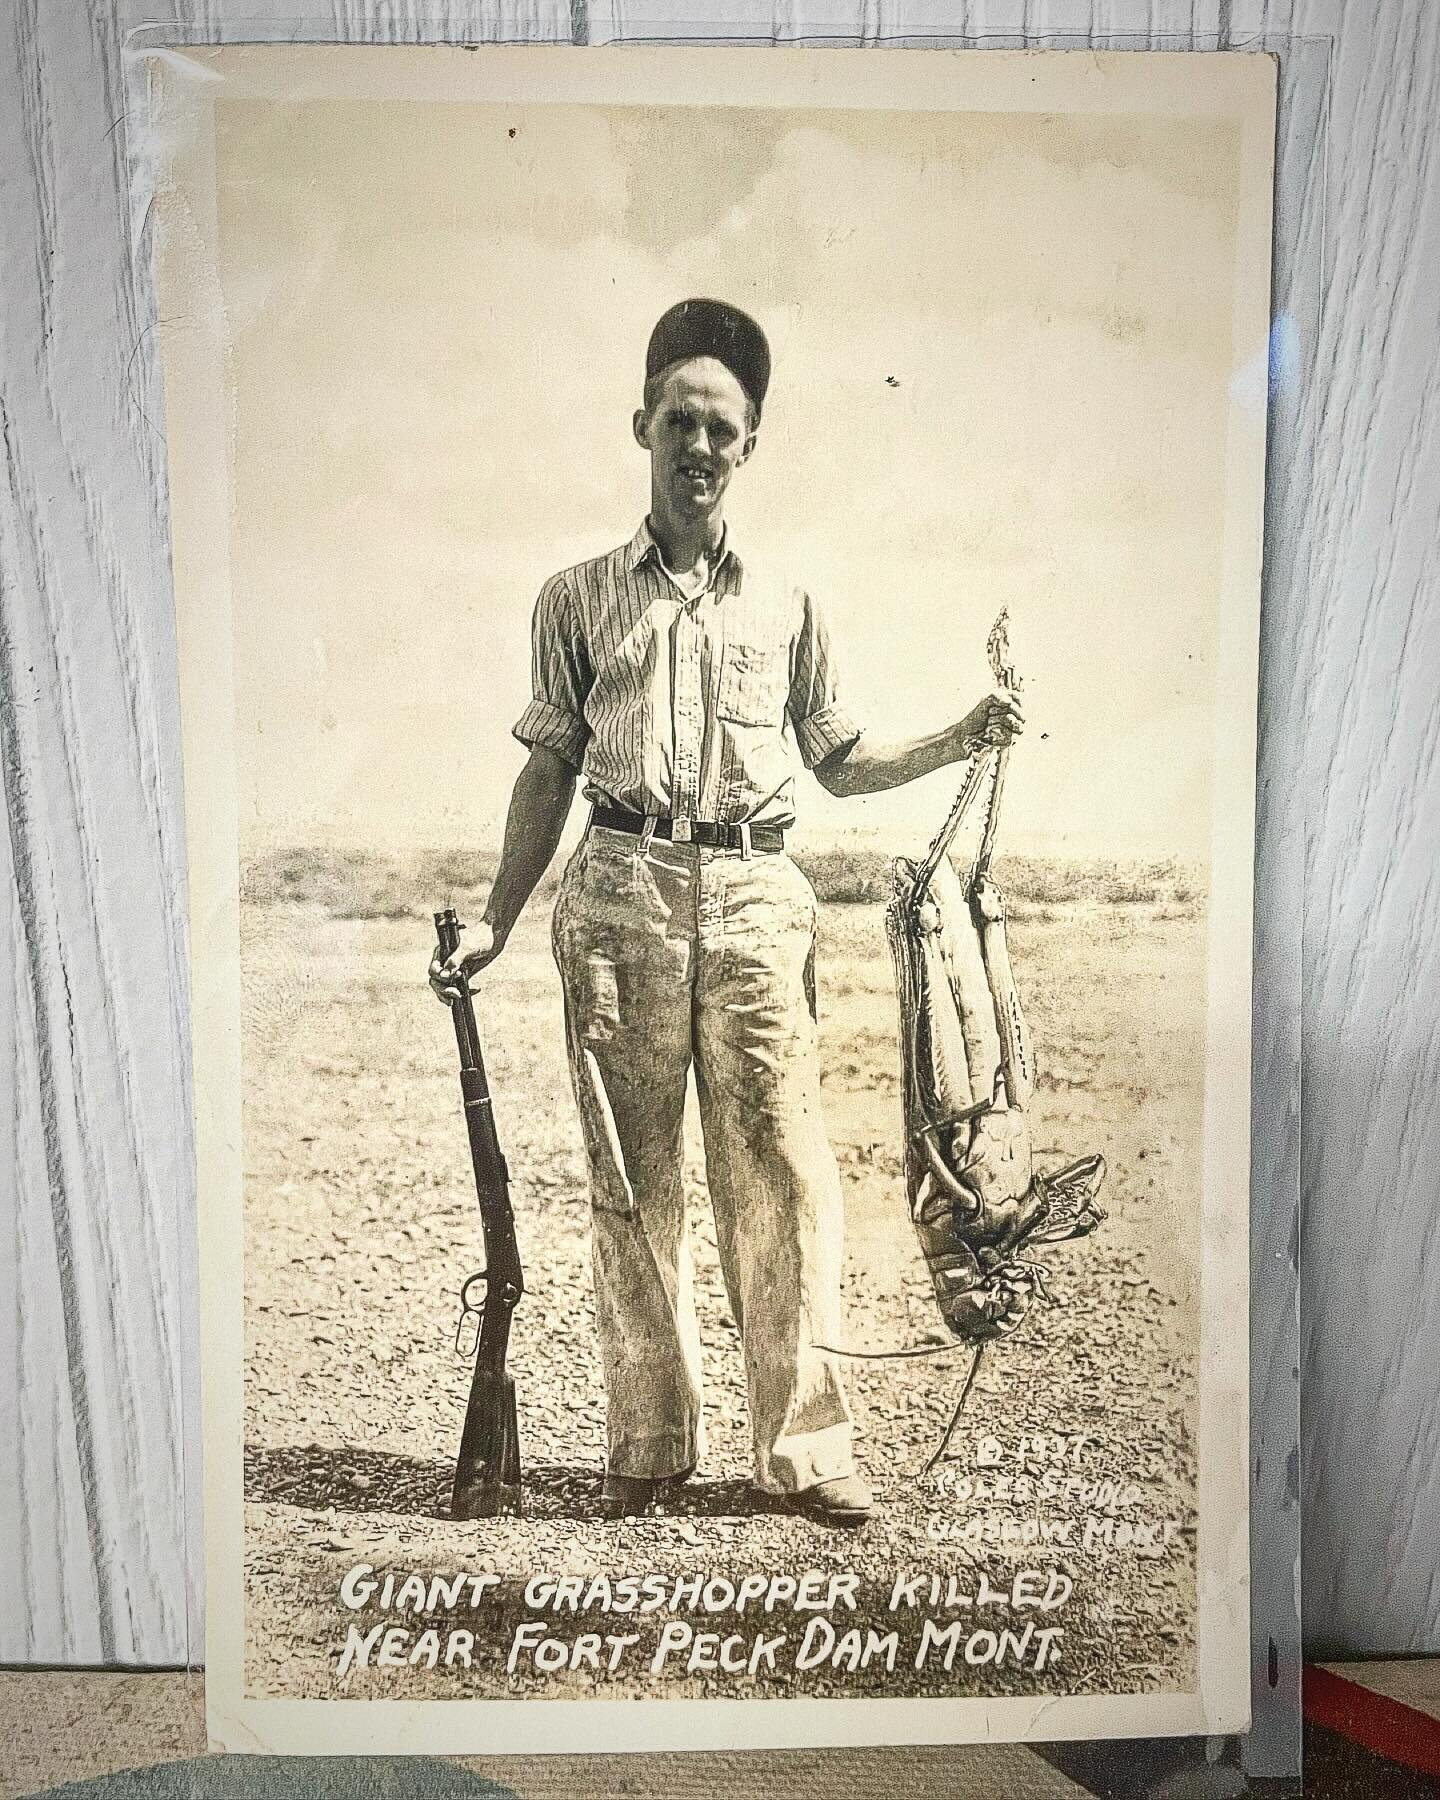 Very recently this week, I acquired an original 1937 Giant Grasshopper photo postcard, also known as a &ldquo;Whopper Hopper&rdquo; card, for display in the Cabinet of Curiosities. This image, which has gone on to trick the masses into believing that